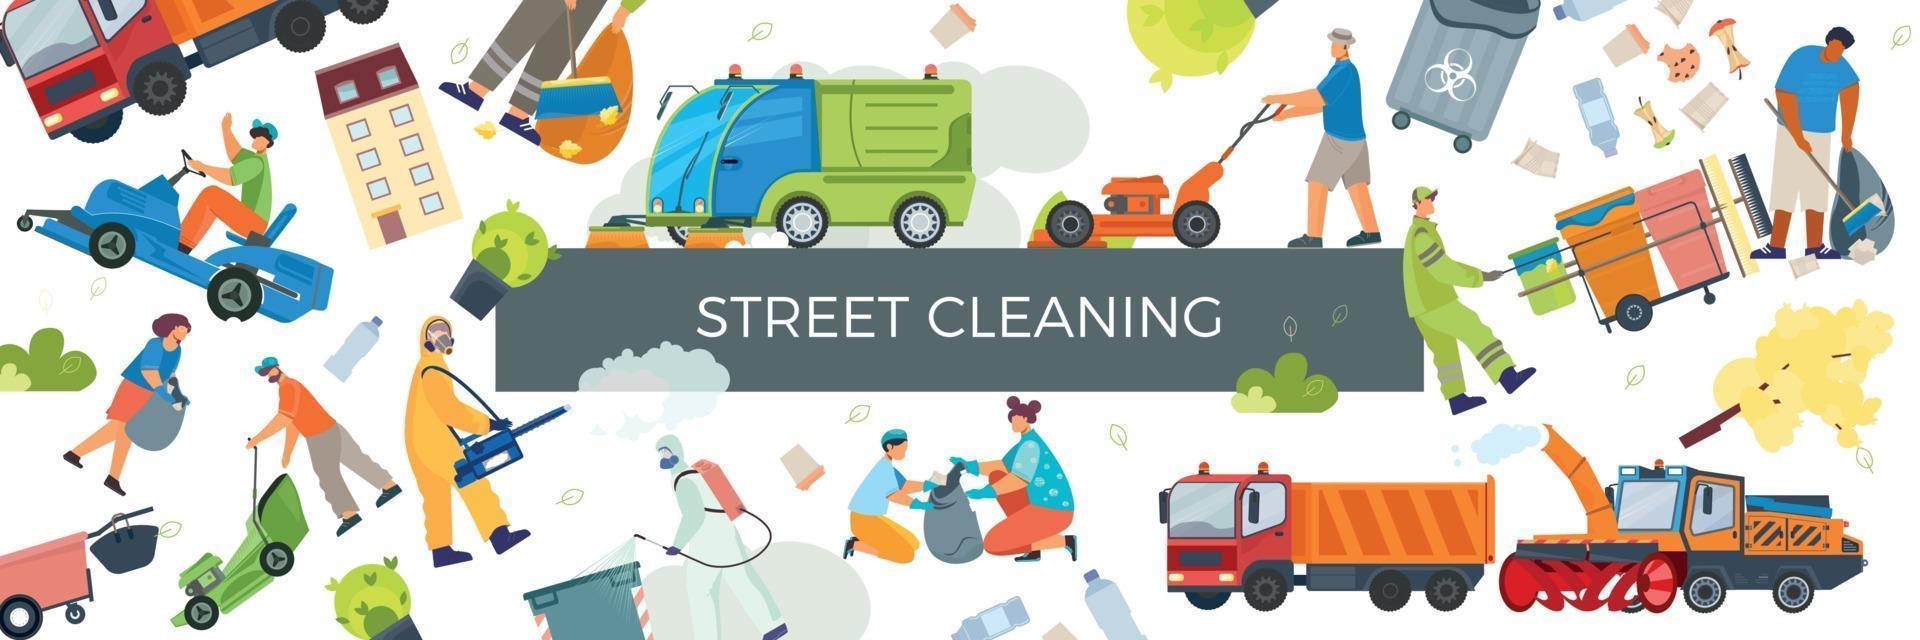 Street Cleaning Pattern Composition vector